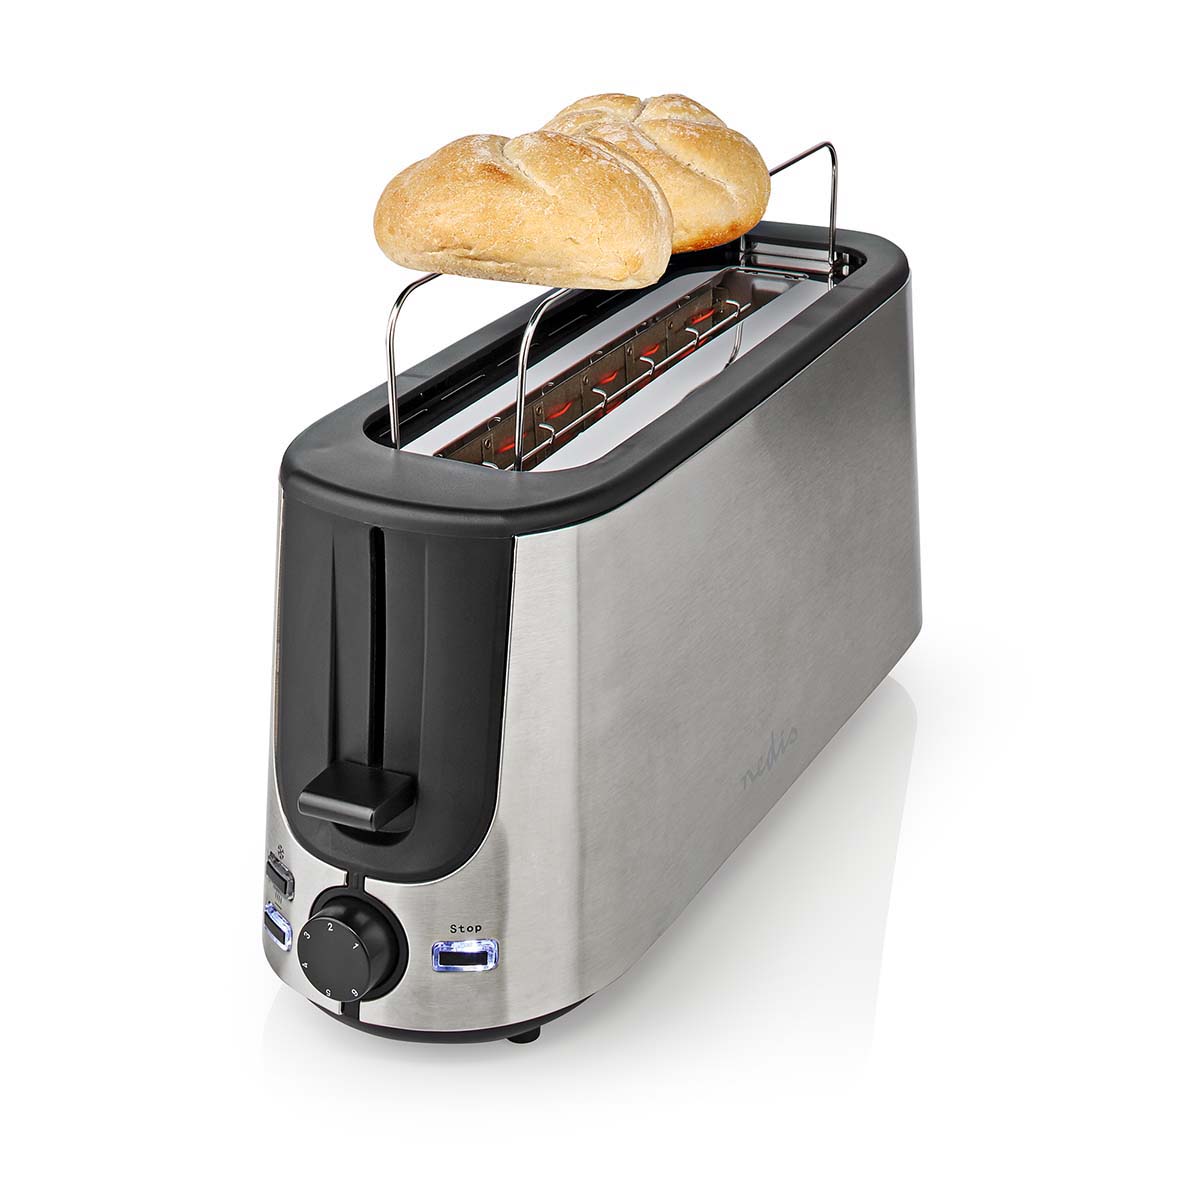 Toaster, Stainless Steel Series, 1 Slot